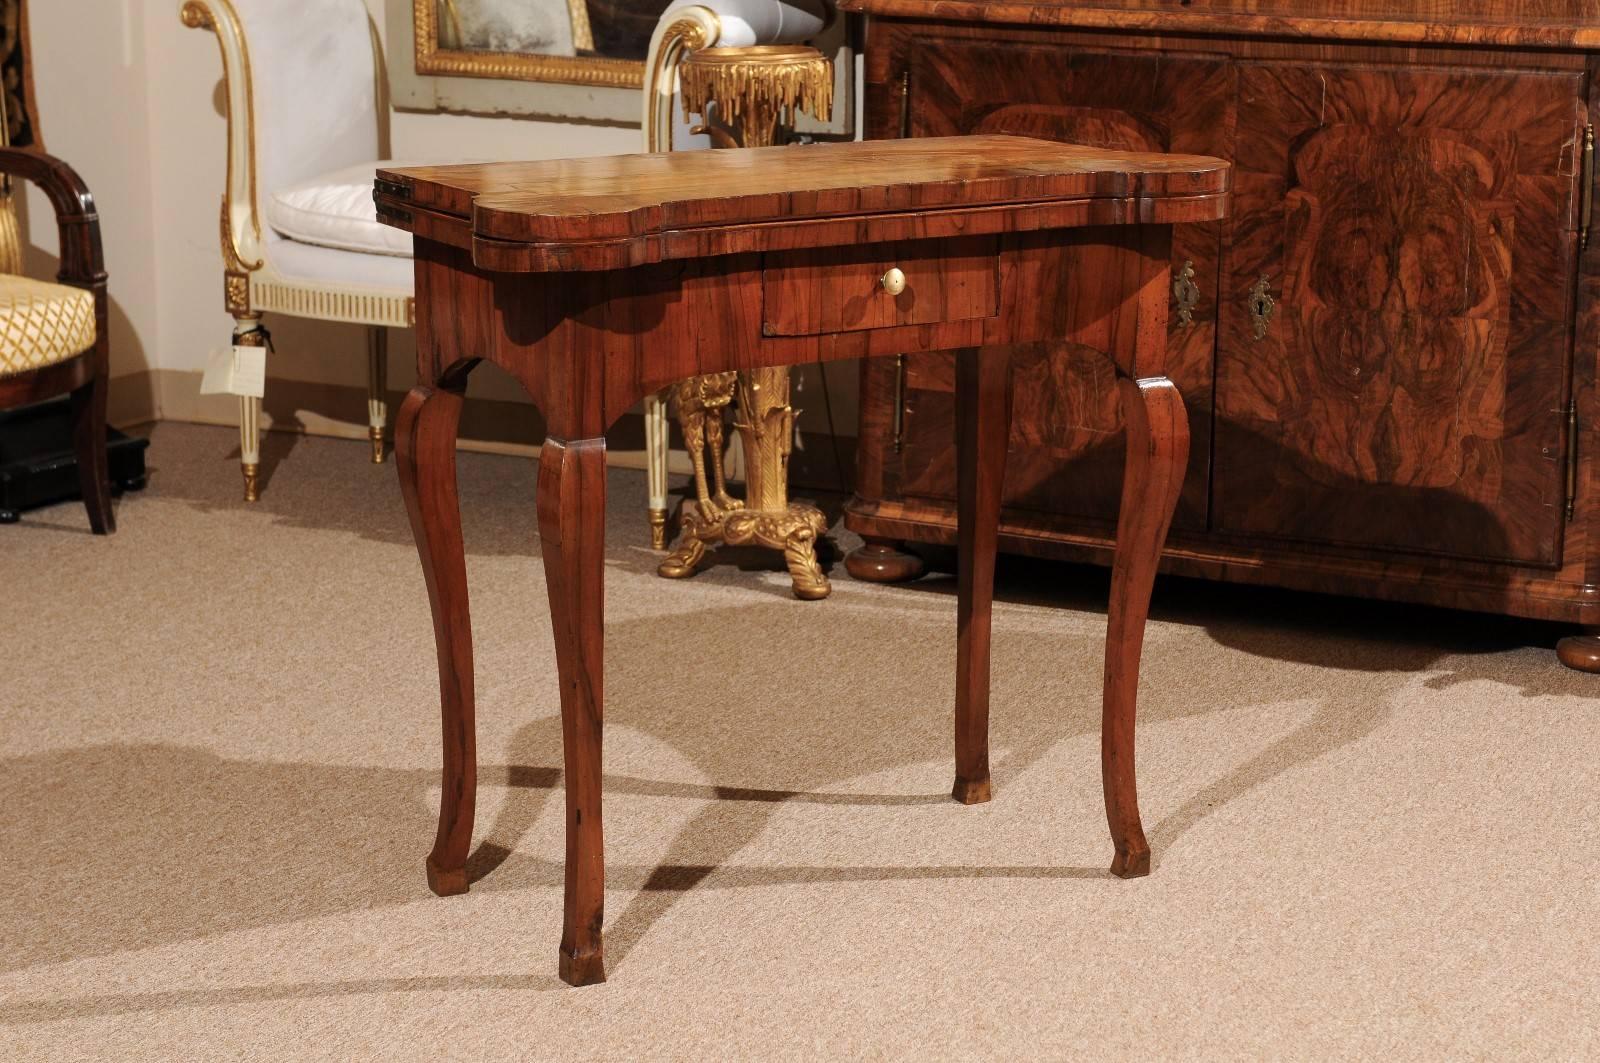 18th century Italian flip-top game table in olivewood with cabriole legs terminating in hoof feet and one (1) drawer. The table opens with a drawer action mechanism to reveal square olivewood tabletop with crossbanding.